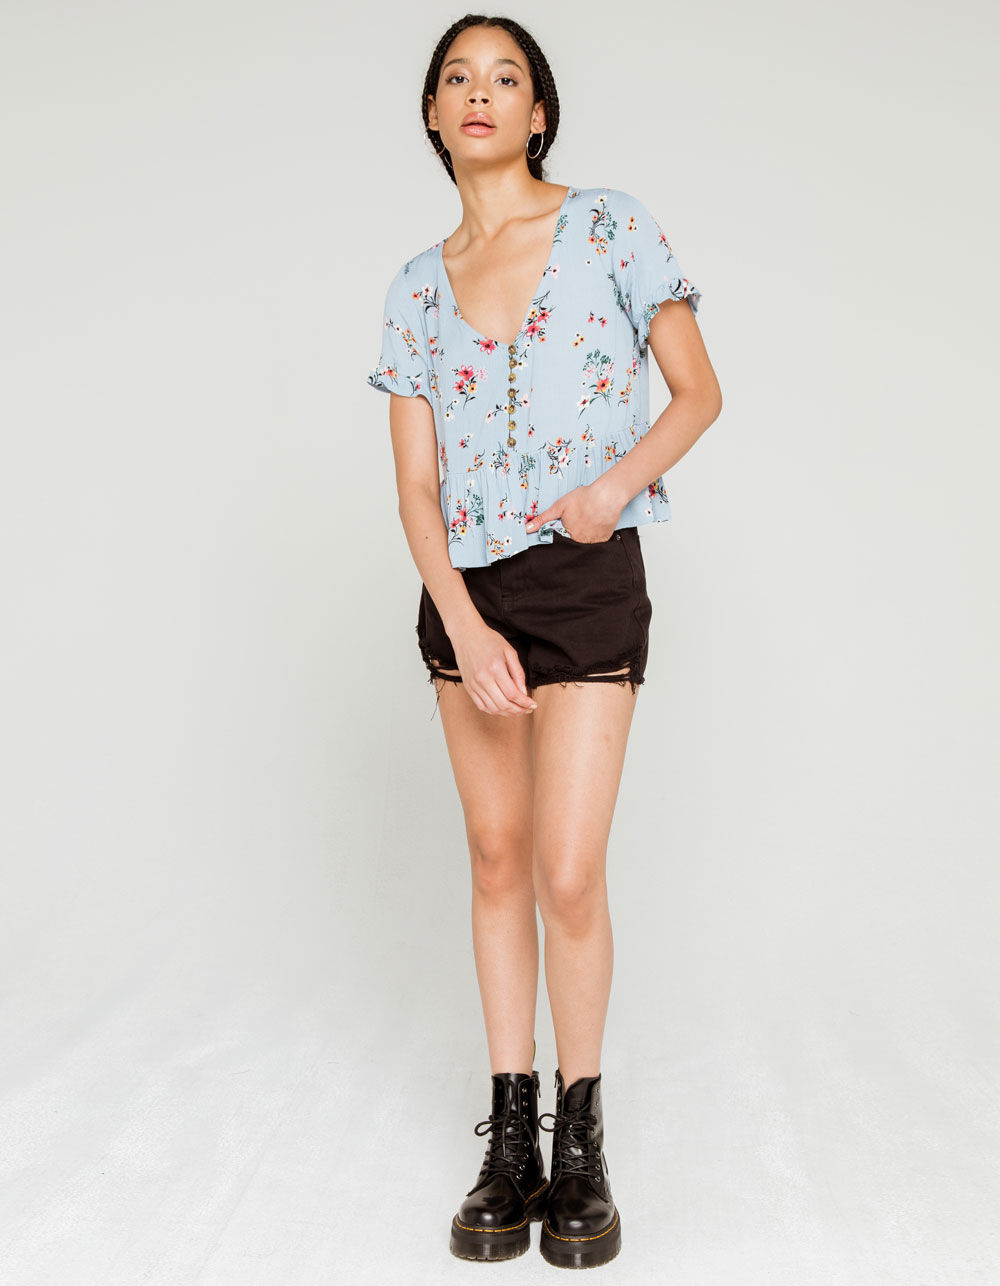 SKY AND SPARROW Floral Button Up Womens Babydoll Top - LIGHT BLUE | Tillys